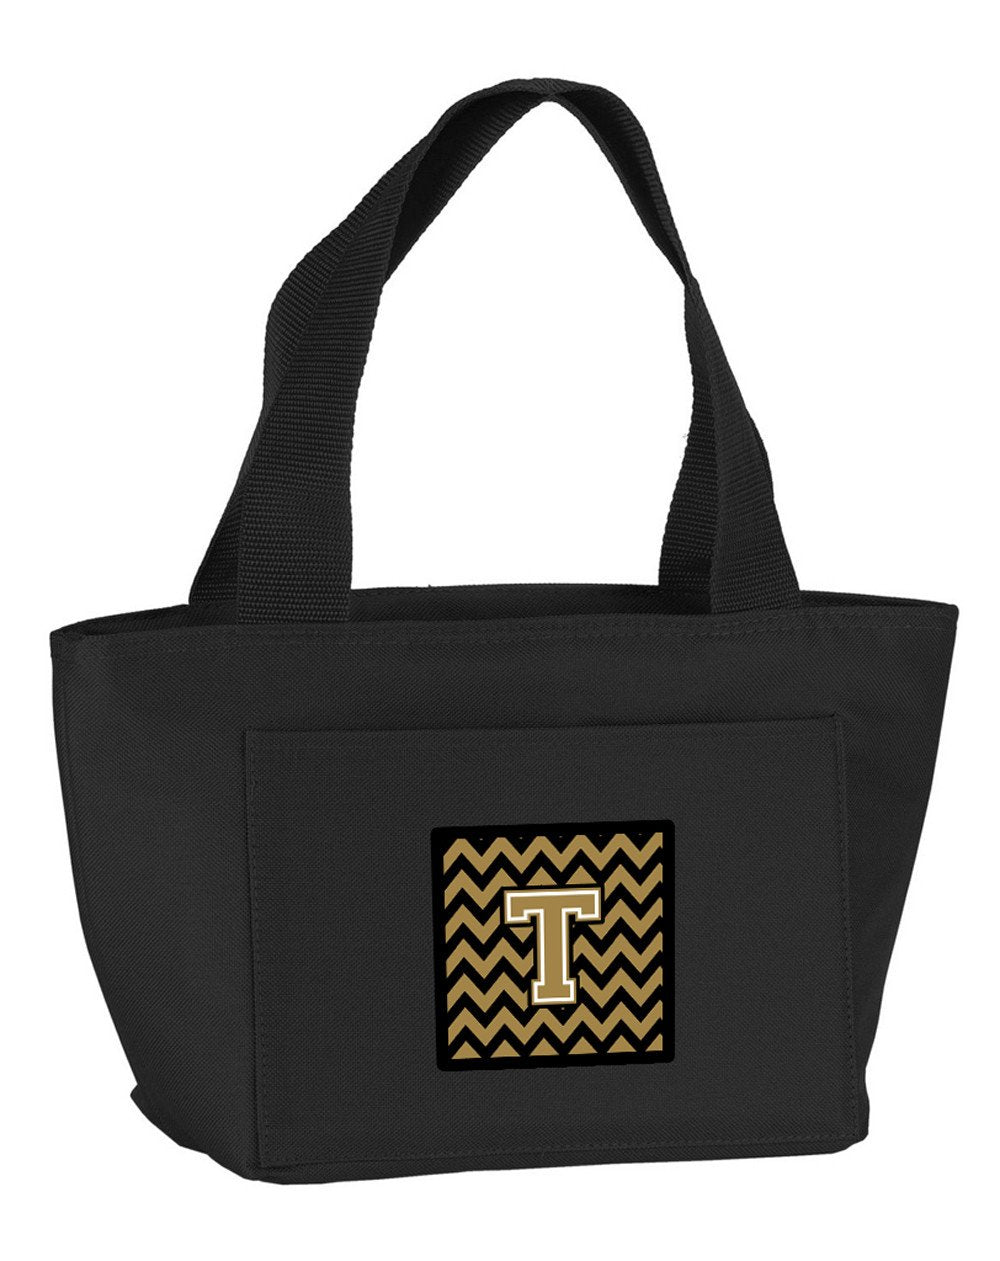 Letter T Chevron Black and Gold  Lunch Bag CJ1050-TBK-8808 by Caroline's Treasures